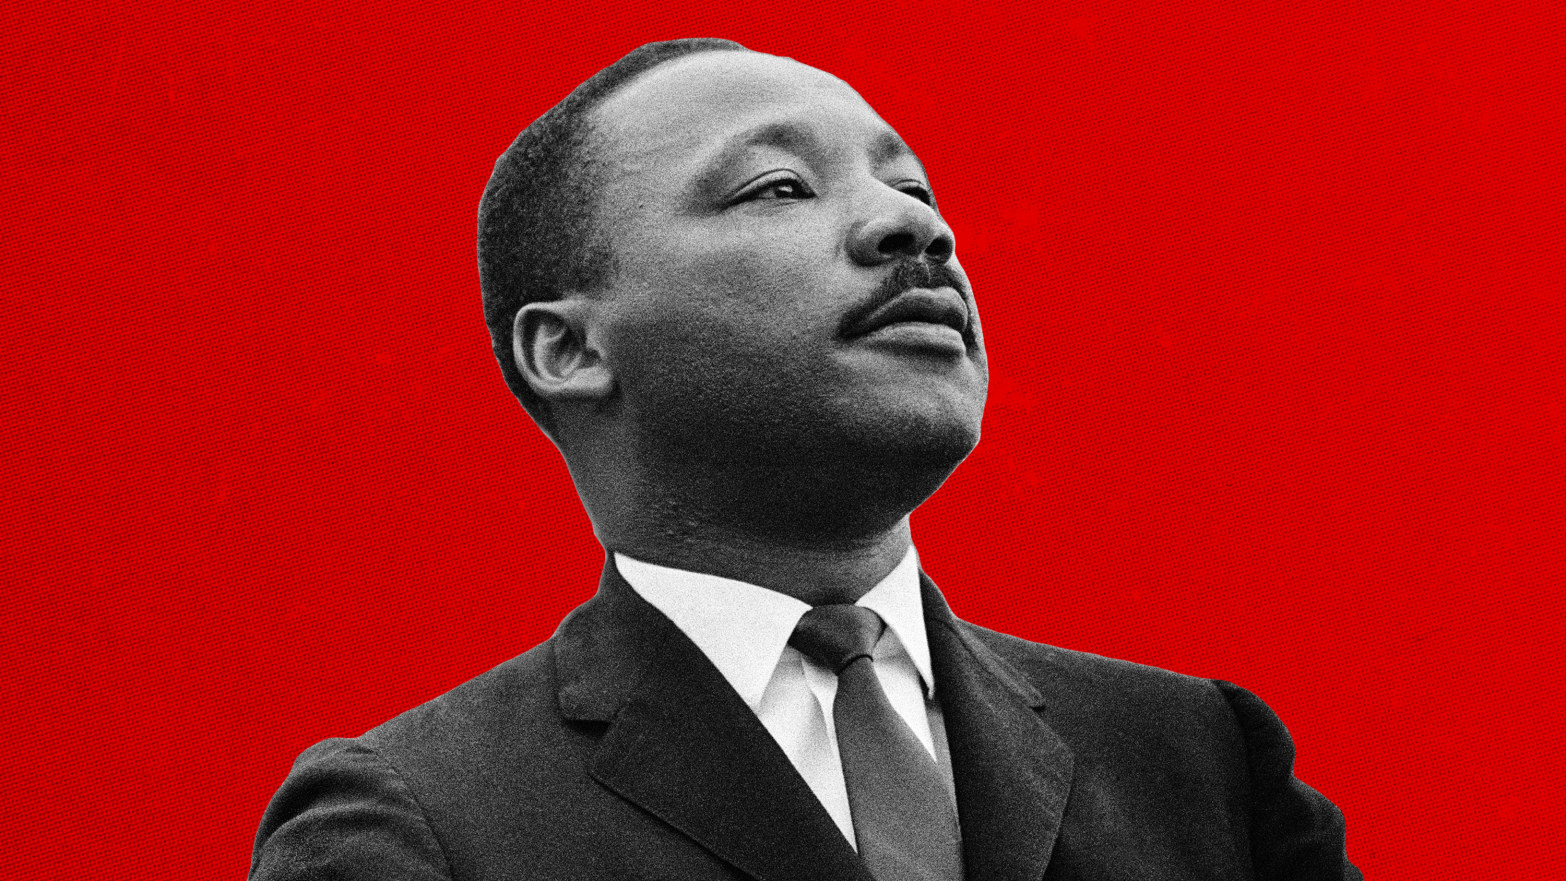 Martin Luther King, Jr. Was No Moderate, He Wanted a 'Radical ...